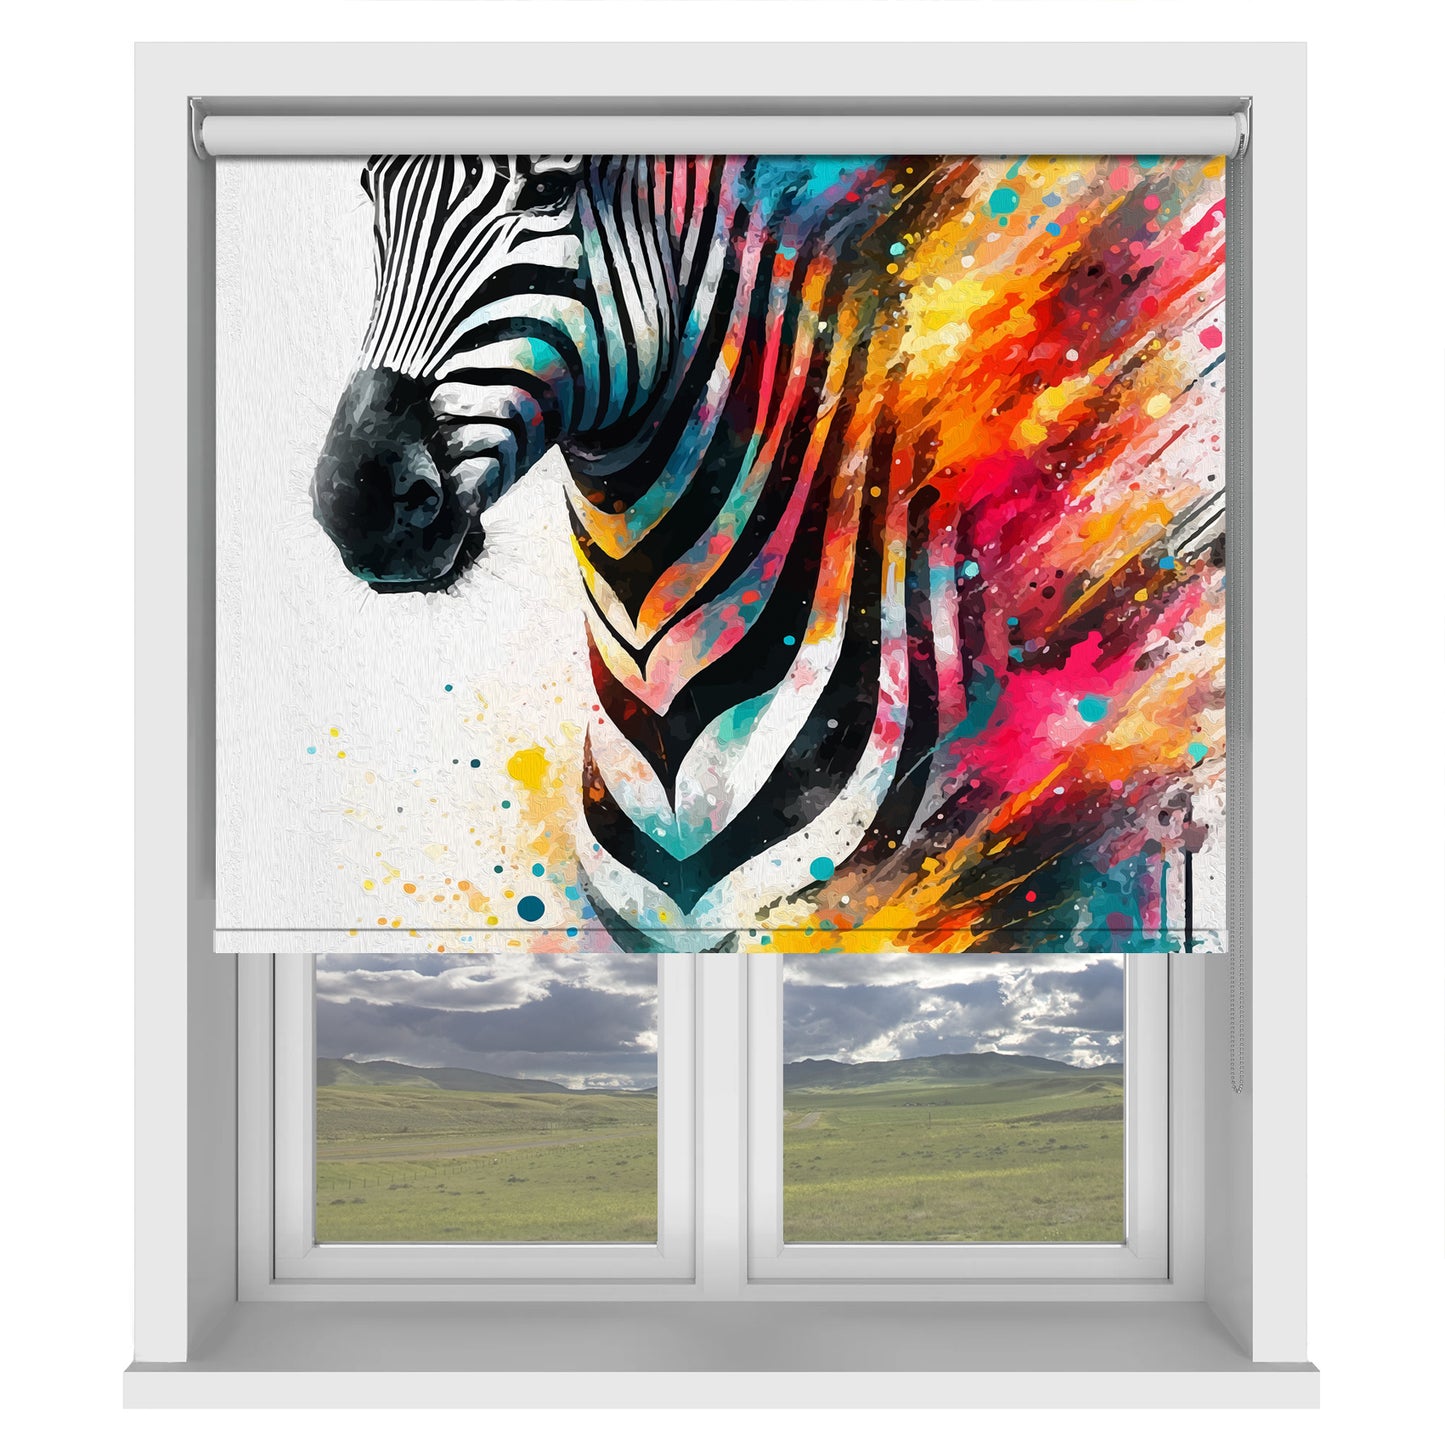 Colourful Zebra Printed Picture Photo Roller Blind - 1X2720590